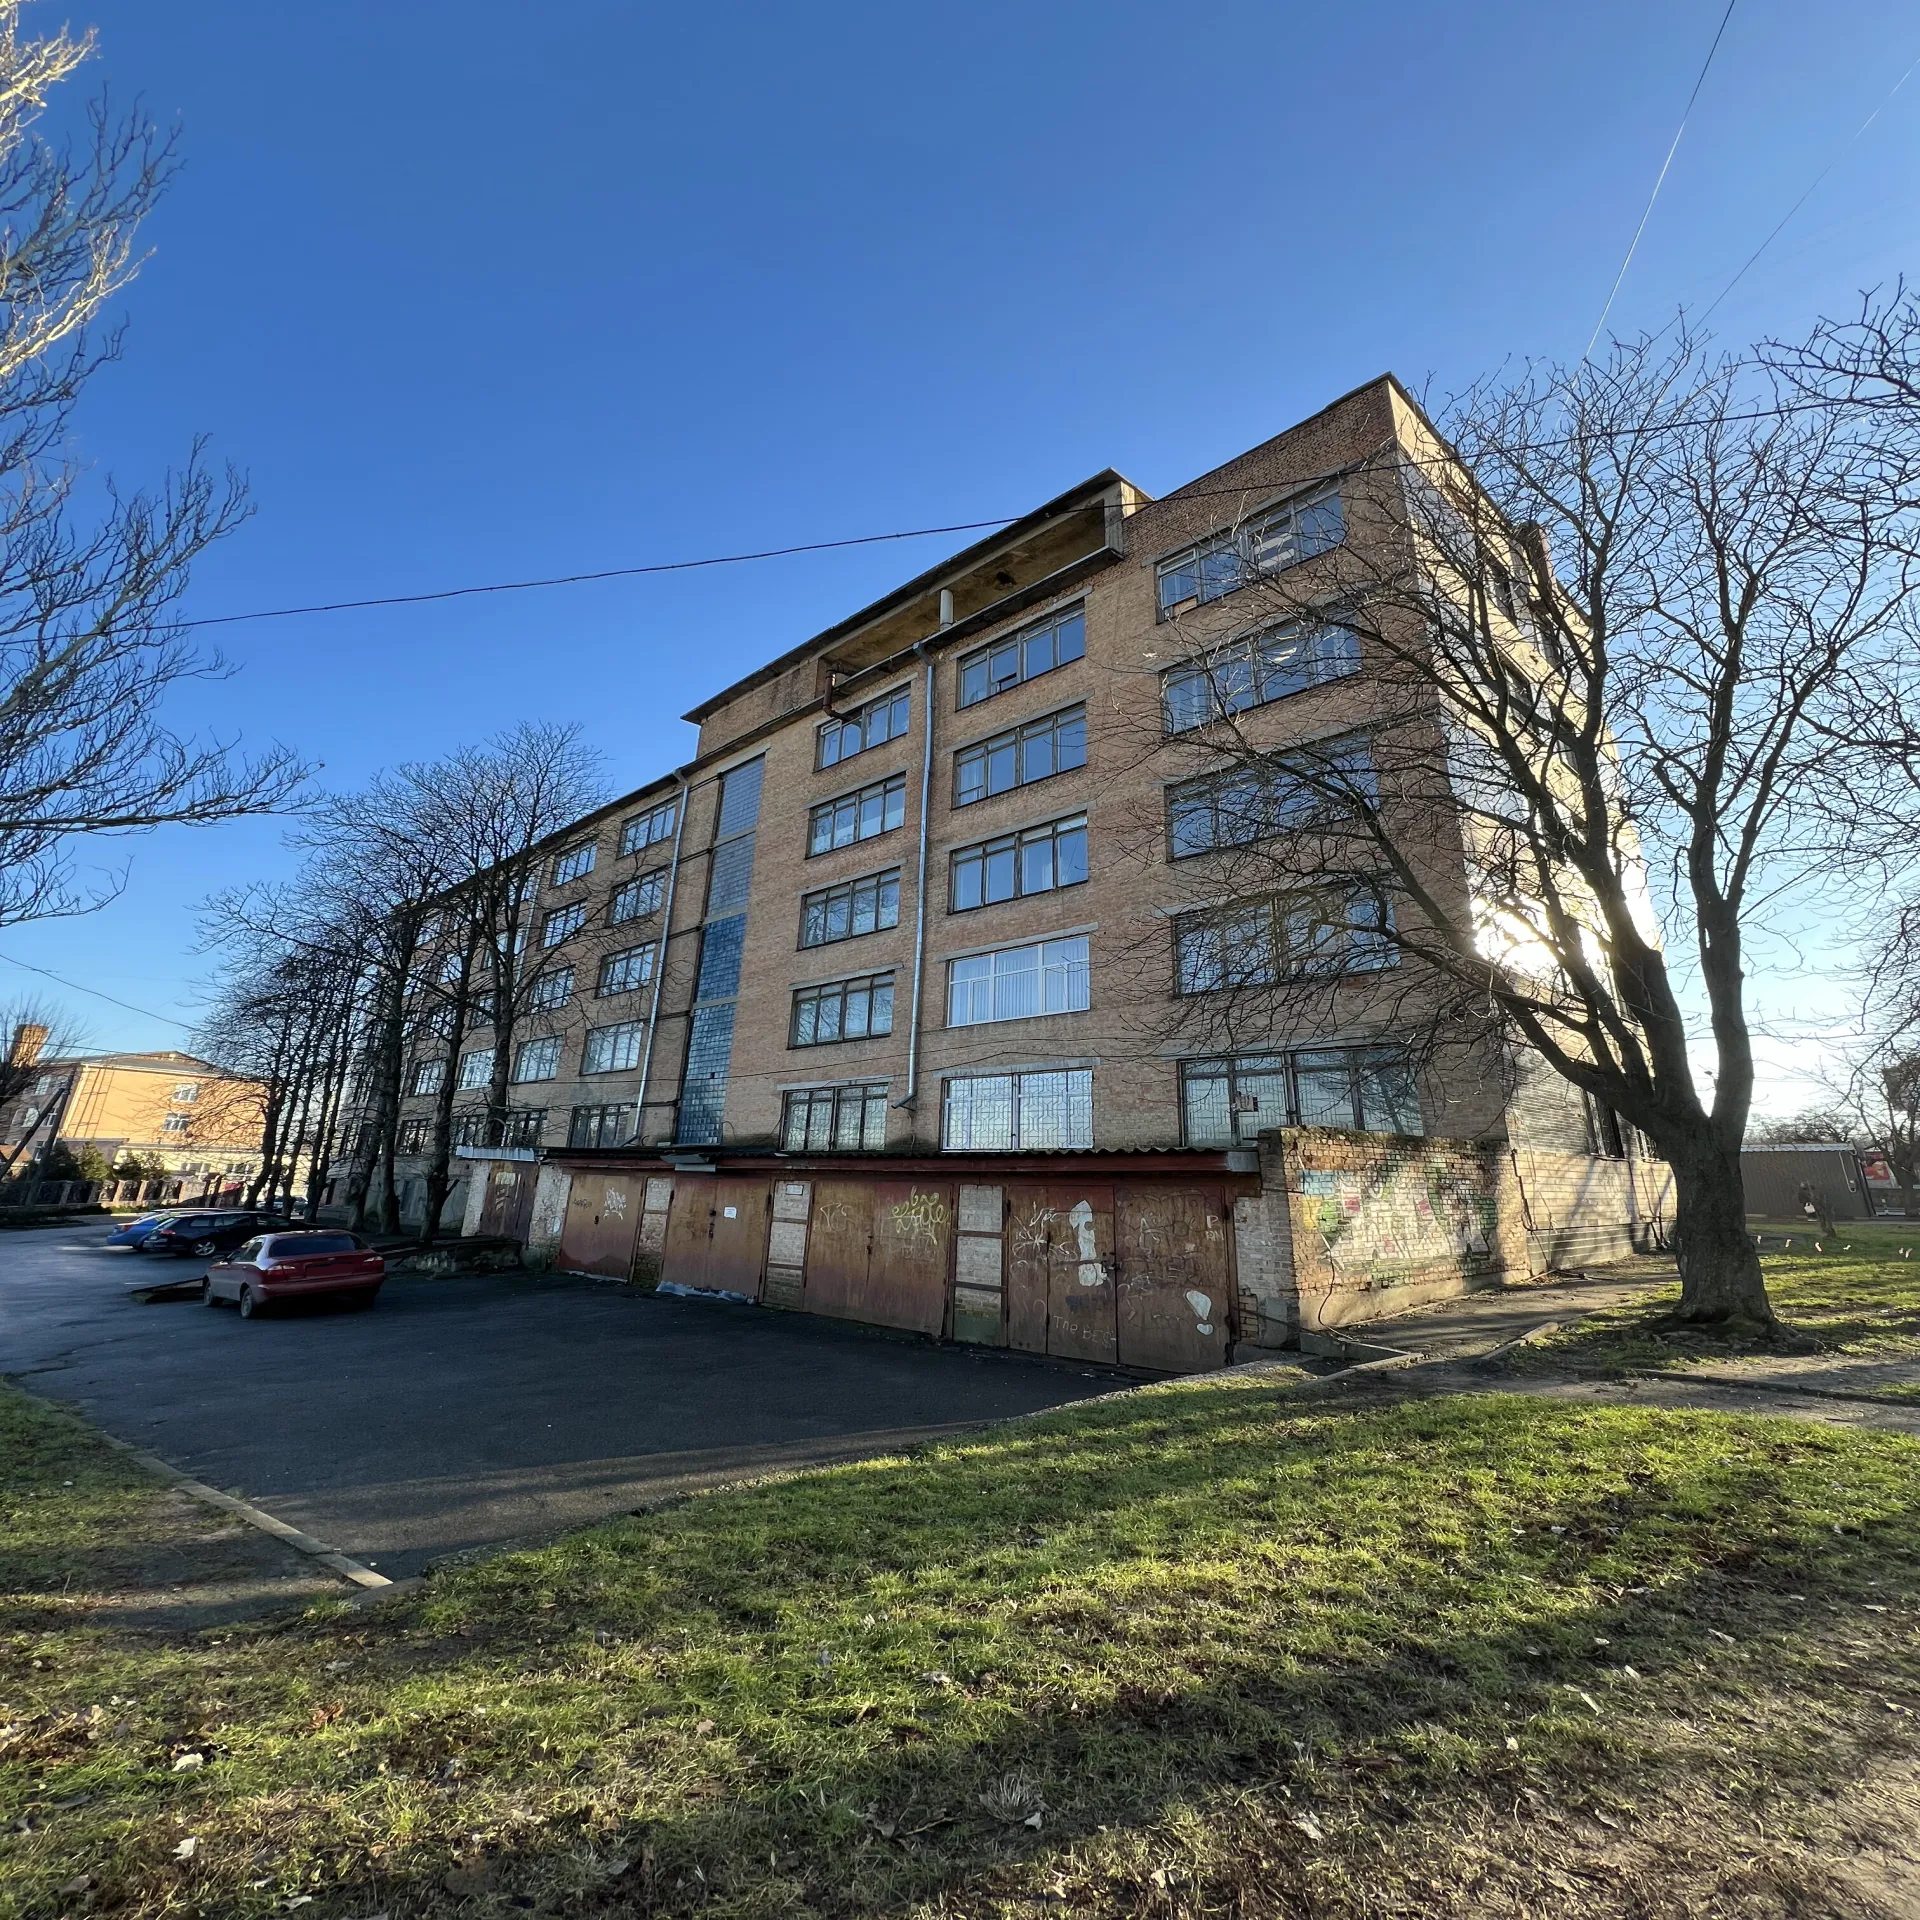 Sale of a 5-story Building in the Center of Kropyvnytskyi